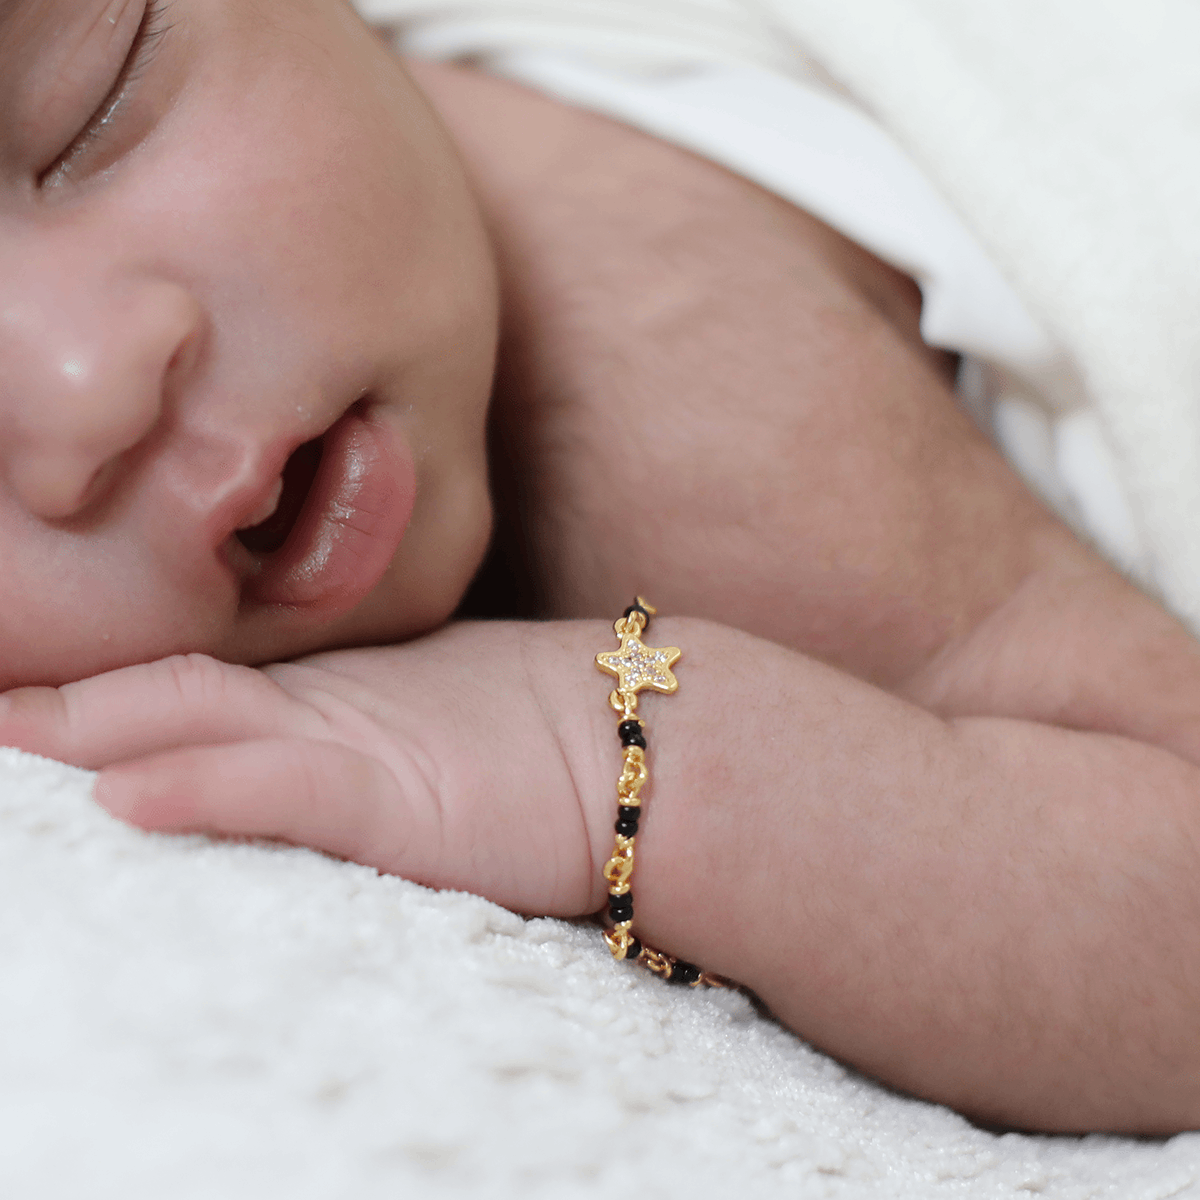 Starry Nazariya Bracelets for Babies in Gold Plated 925 Silver (Set of 2)